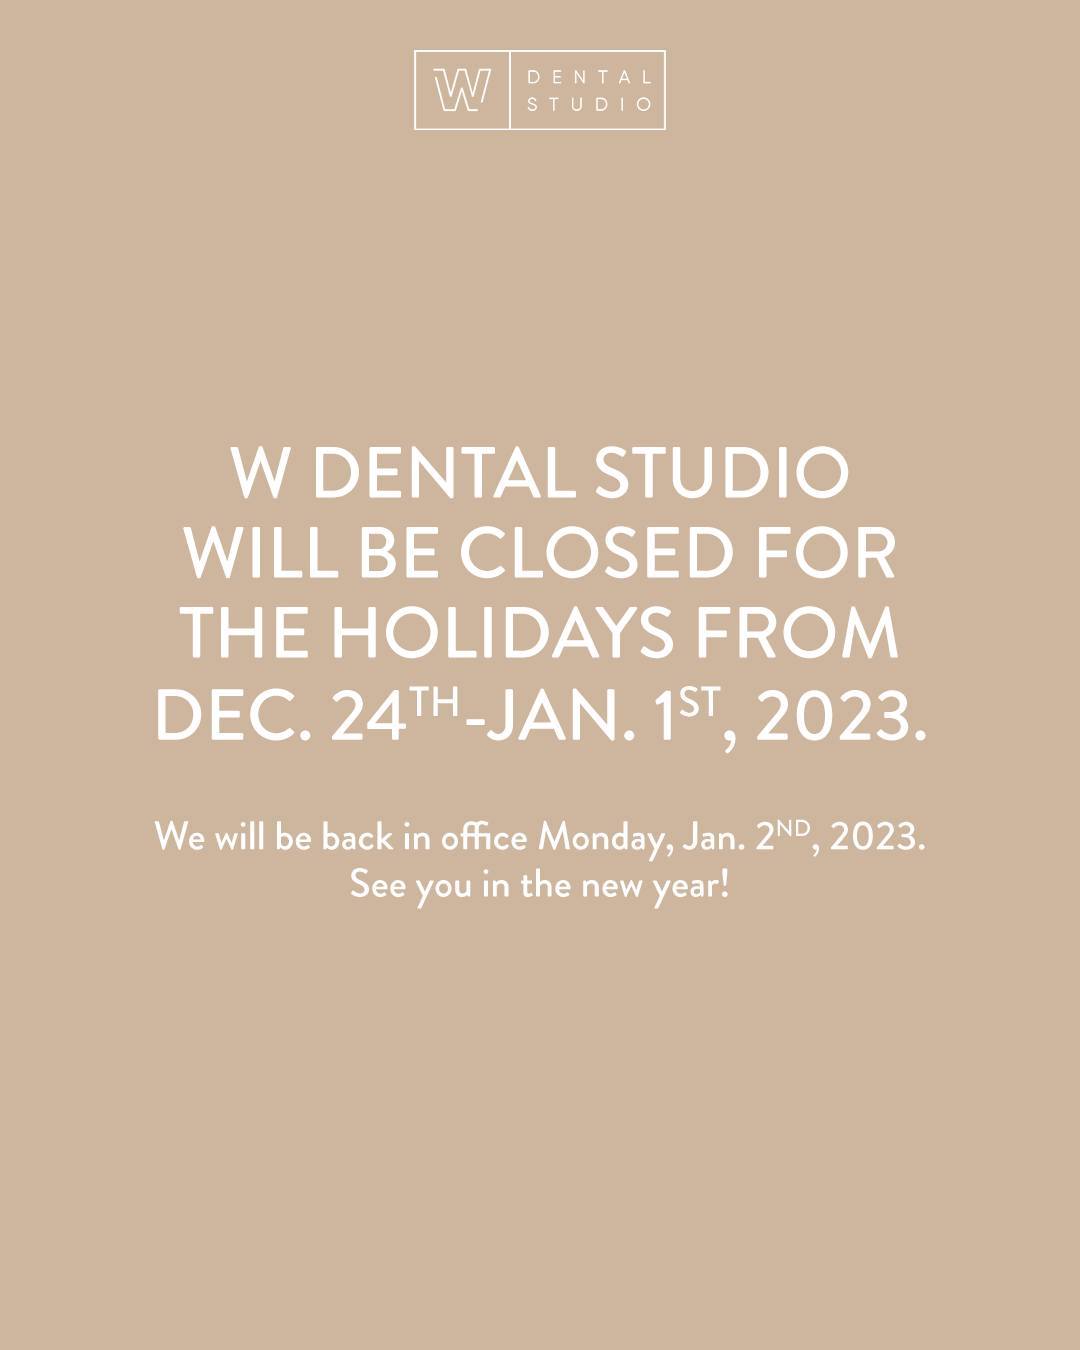 W DENTAL STUDIO WILL BE CLOSED FOR THE HOLIDAYS FROM DEC. 24TH-JAN. 1ST, 2023. 🦷🎄❄️

We will be back in office Monday, Jan. 2nd, 2023.

See you in the new year!